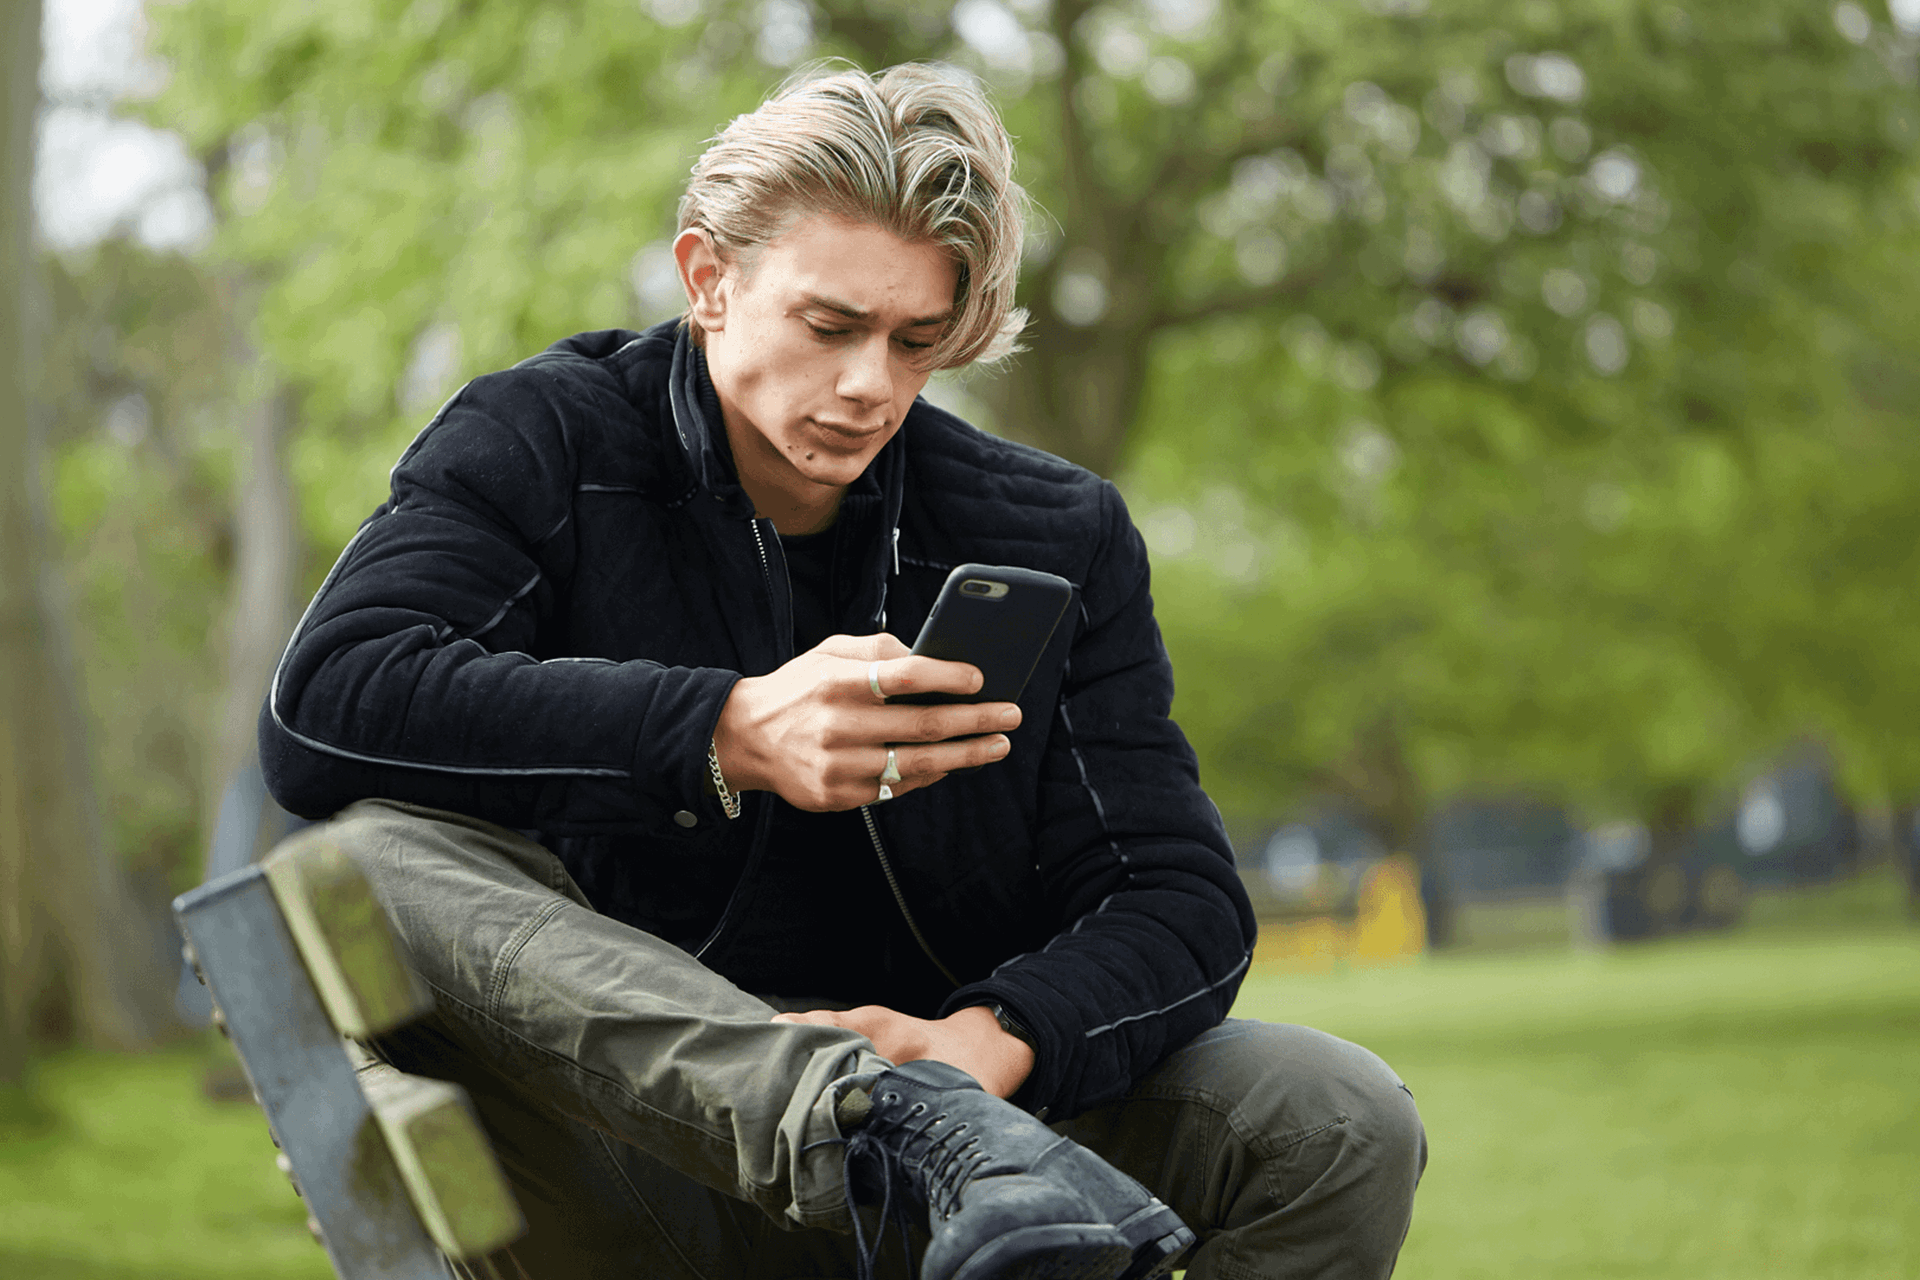 medium-shot-of-a-young-man-in-black-jacket-looking-at-his-phone-while-sitting-on-a-bench-in-the-park-with-trees-on-background